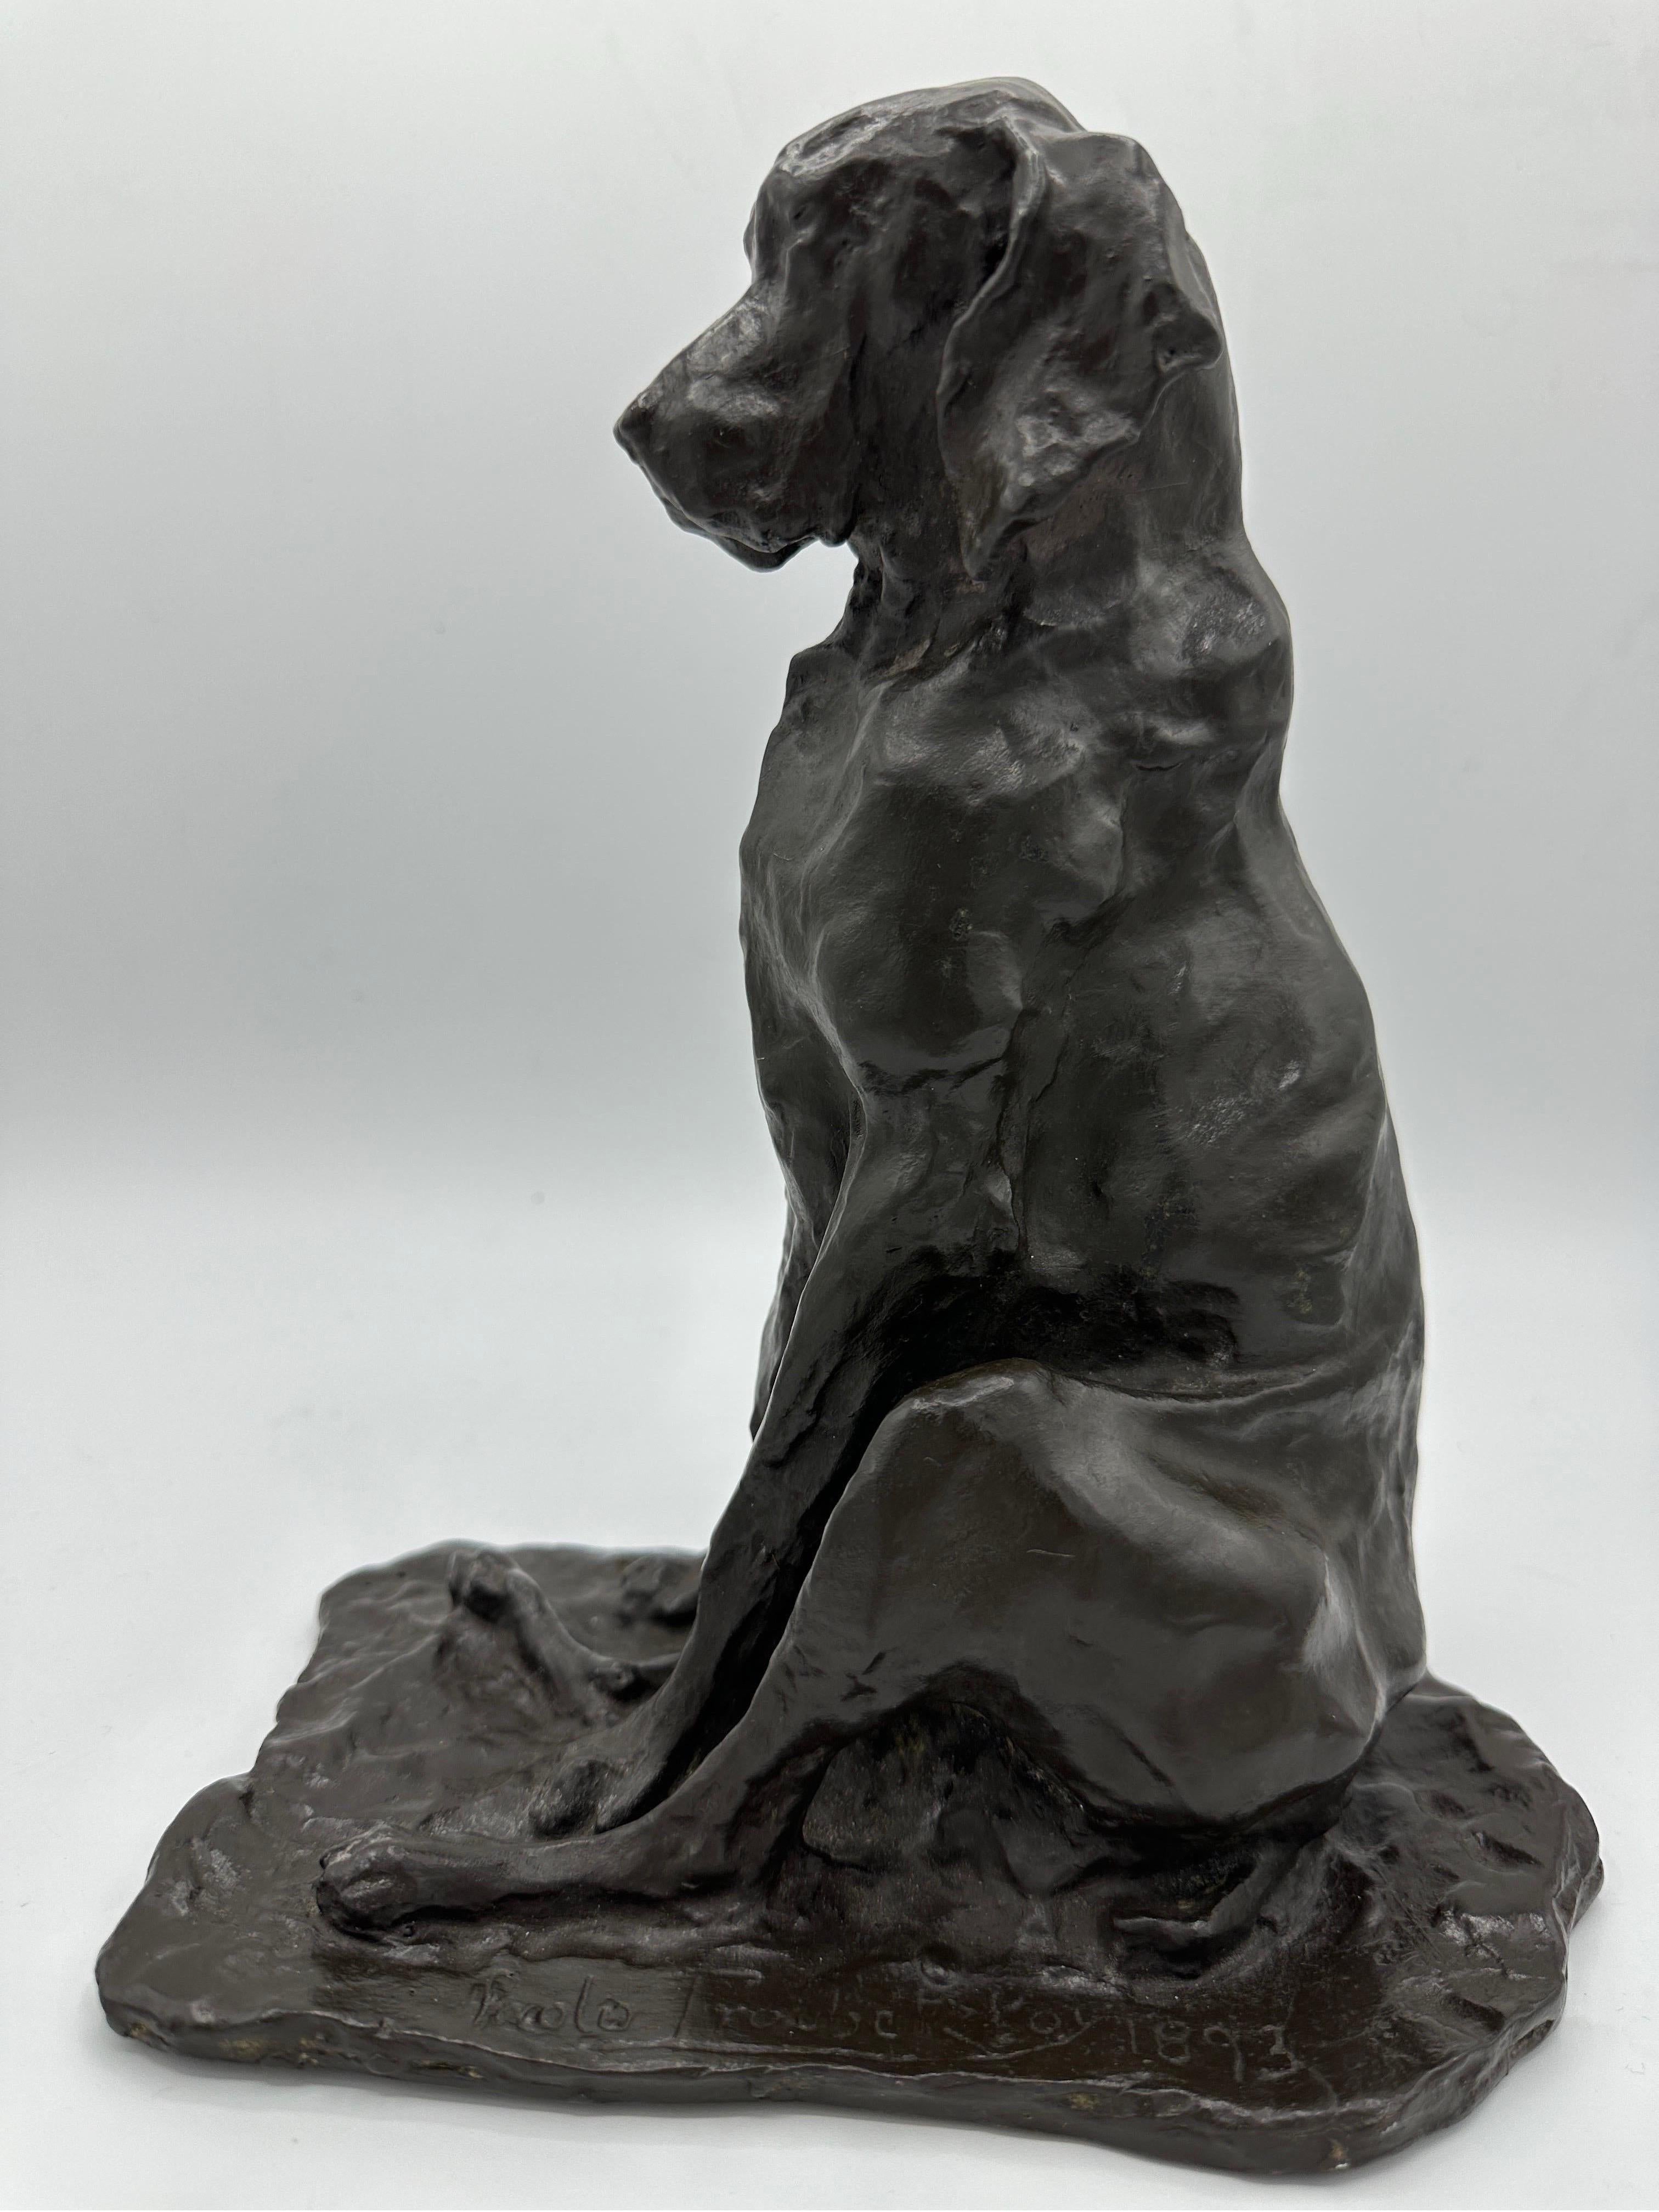 Prince Paul Troubetzkoy Figurative Sculpture - A late 19th century bronze animalier figure of a seated hound